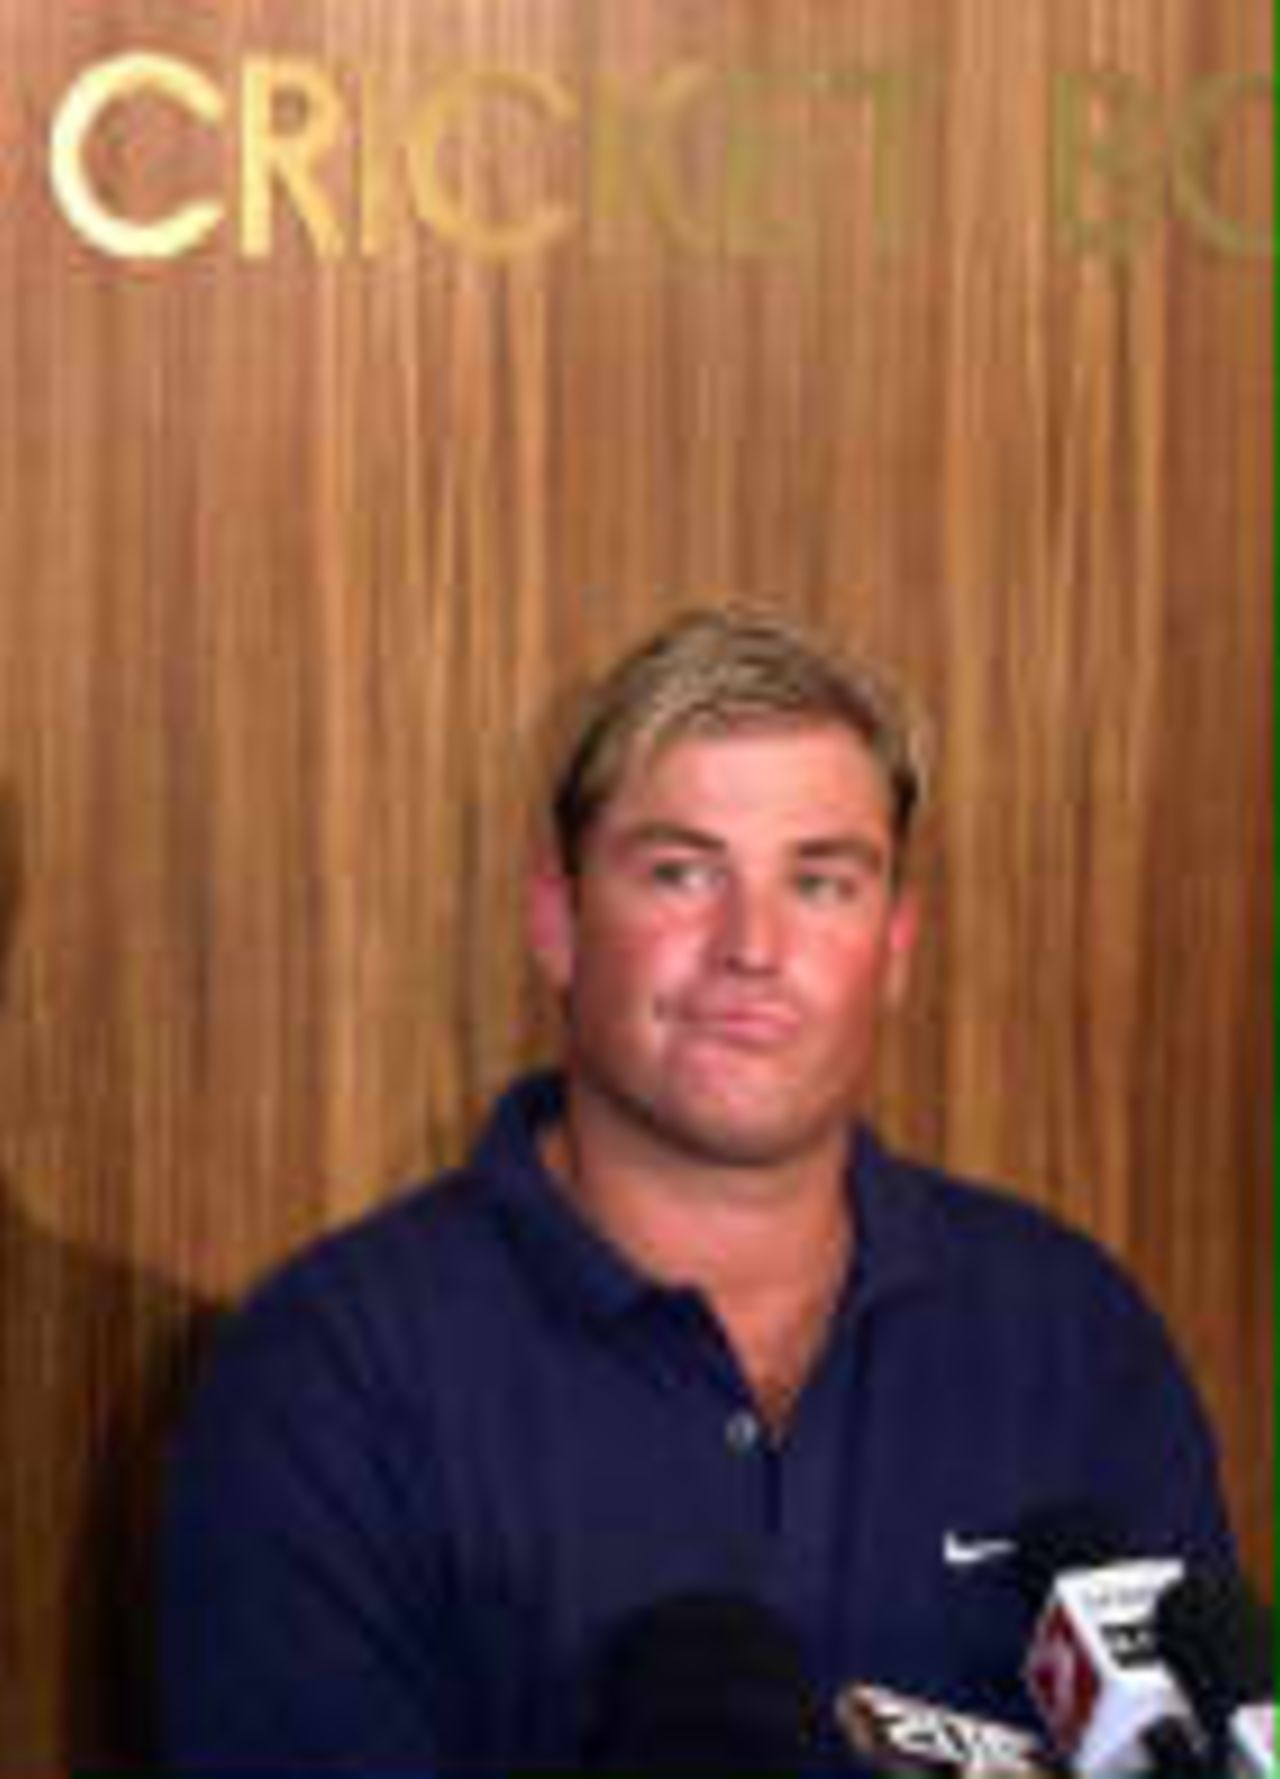 Warne at the press conference announcing his inclusion in the 5th test squad  - England in Australia, 1998-99